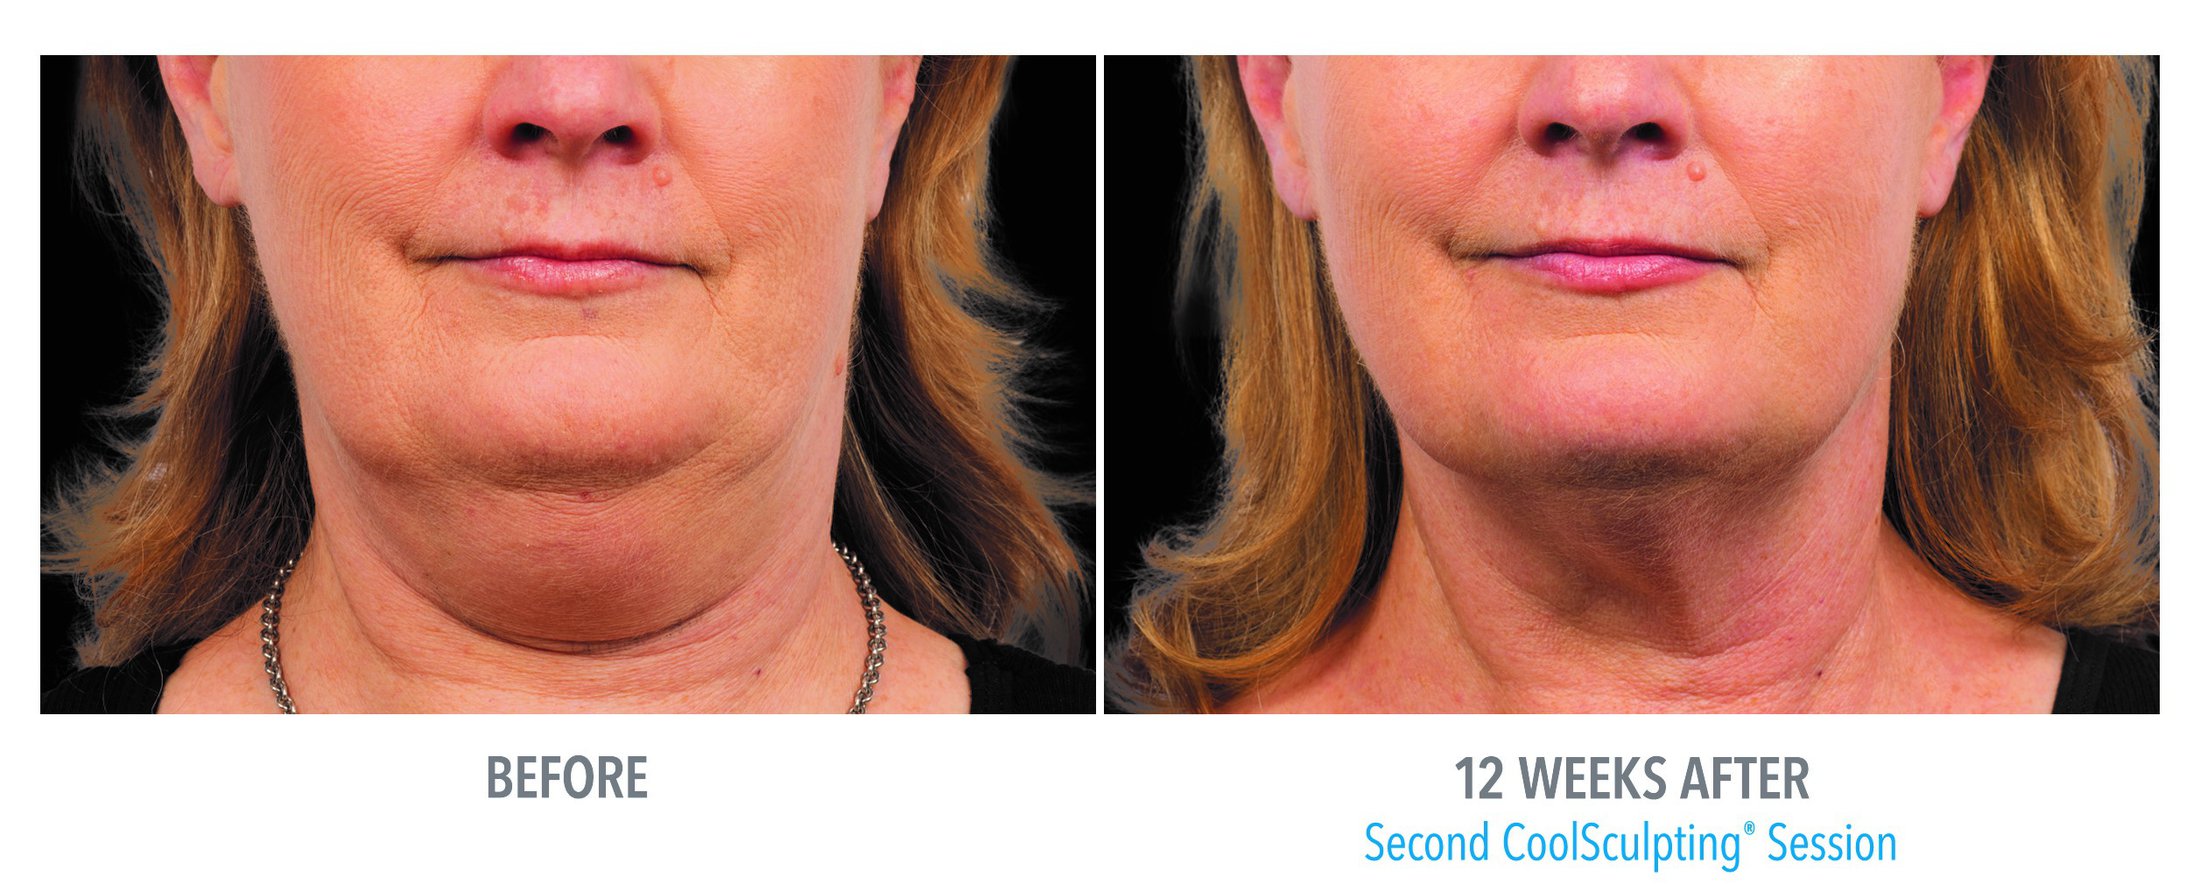 Coolsculpting Before and After Feature 3